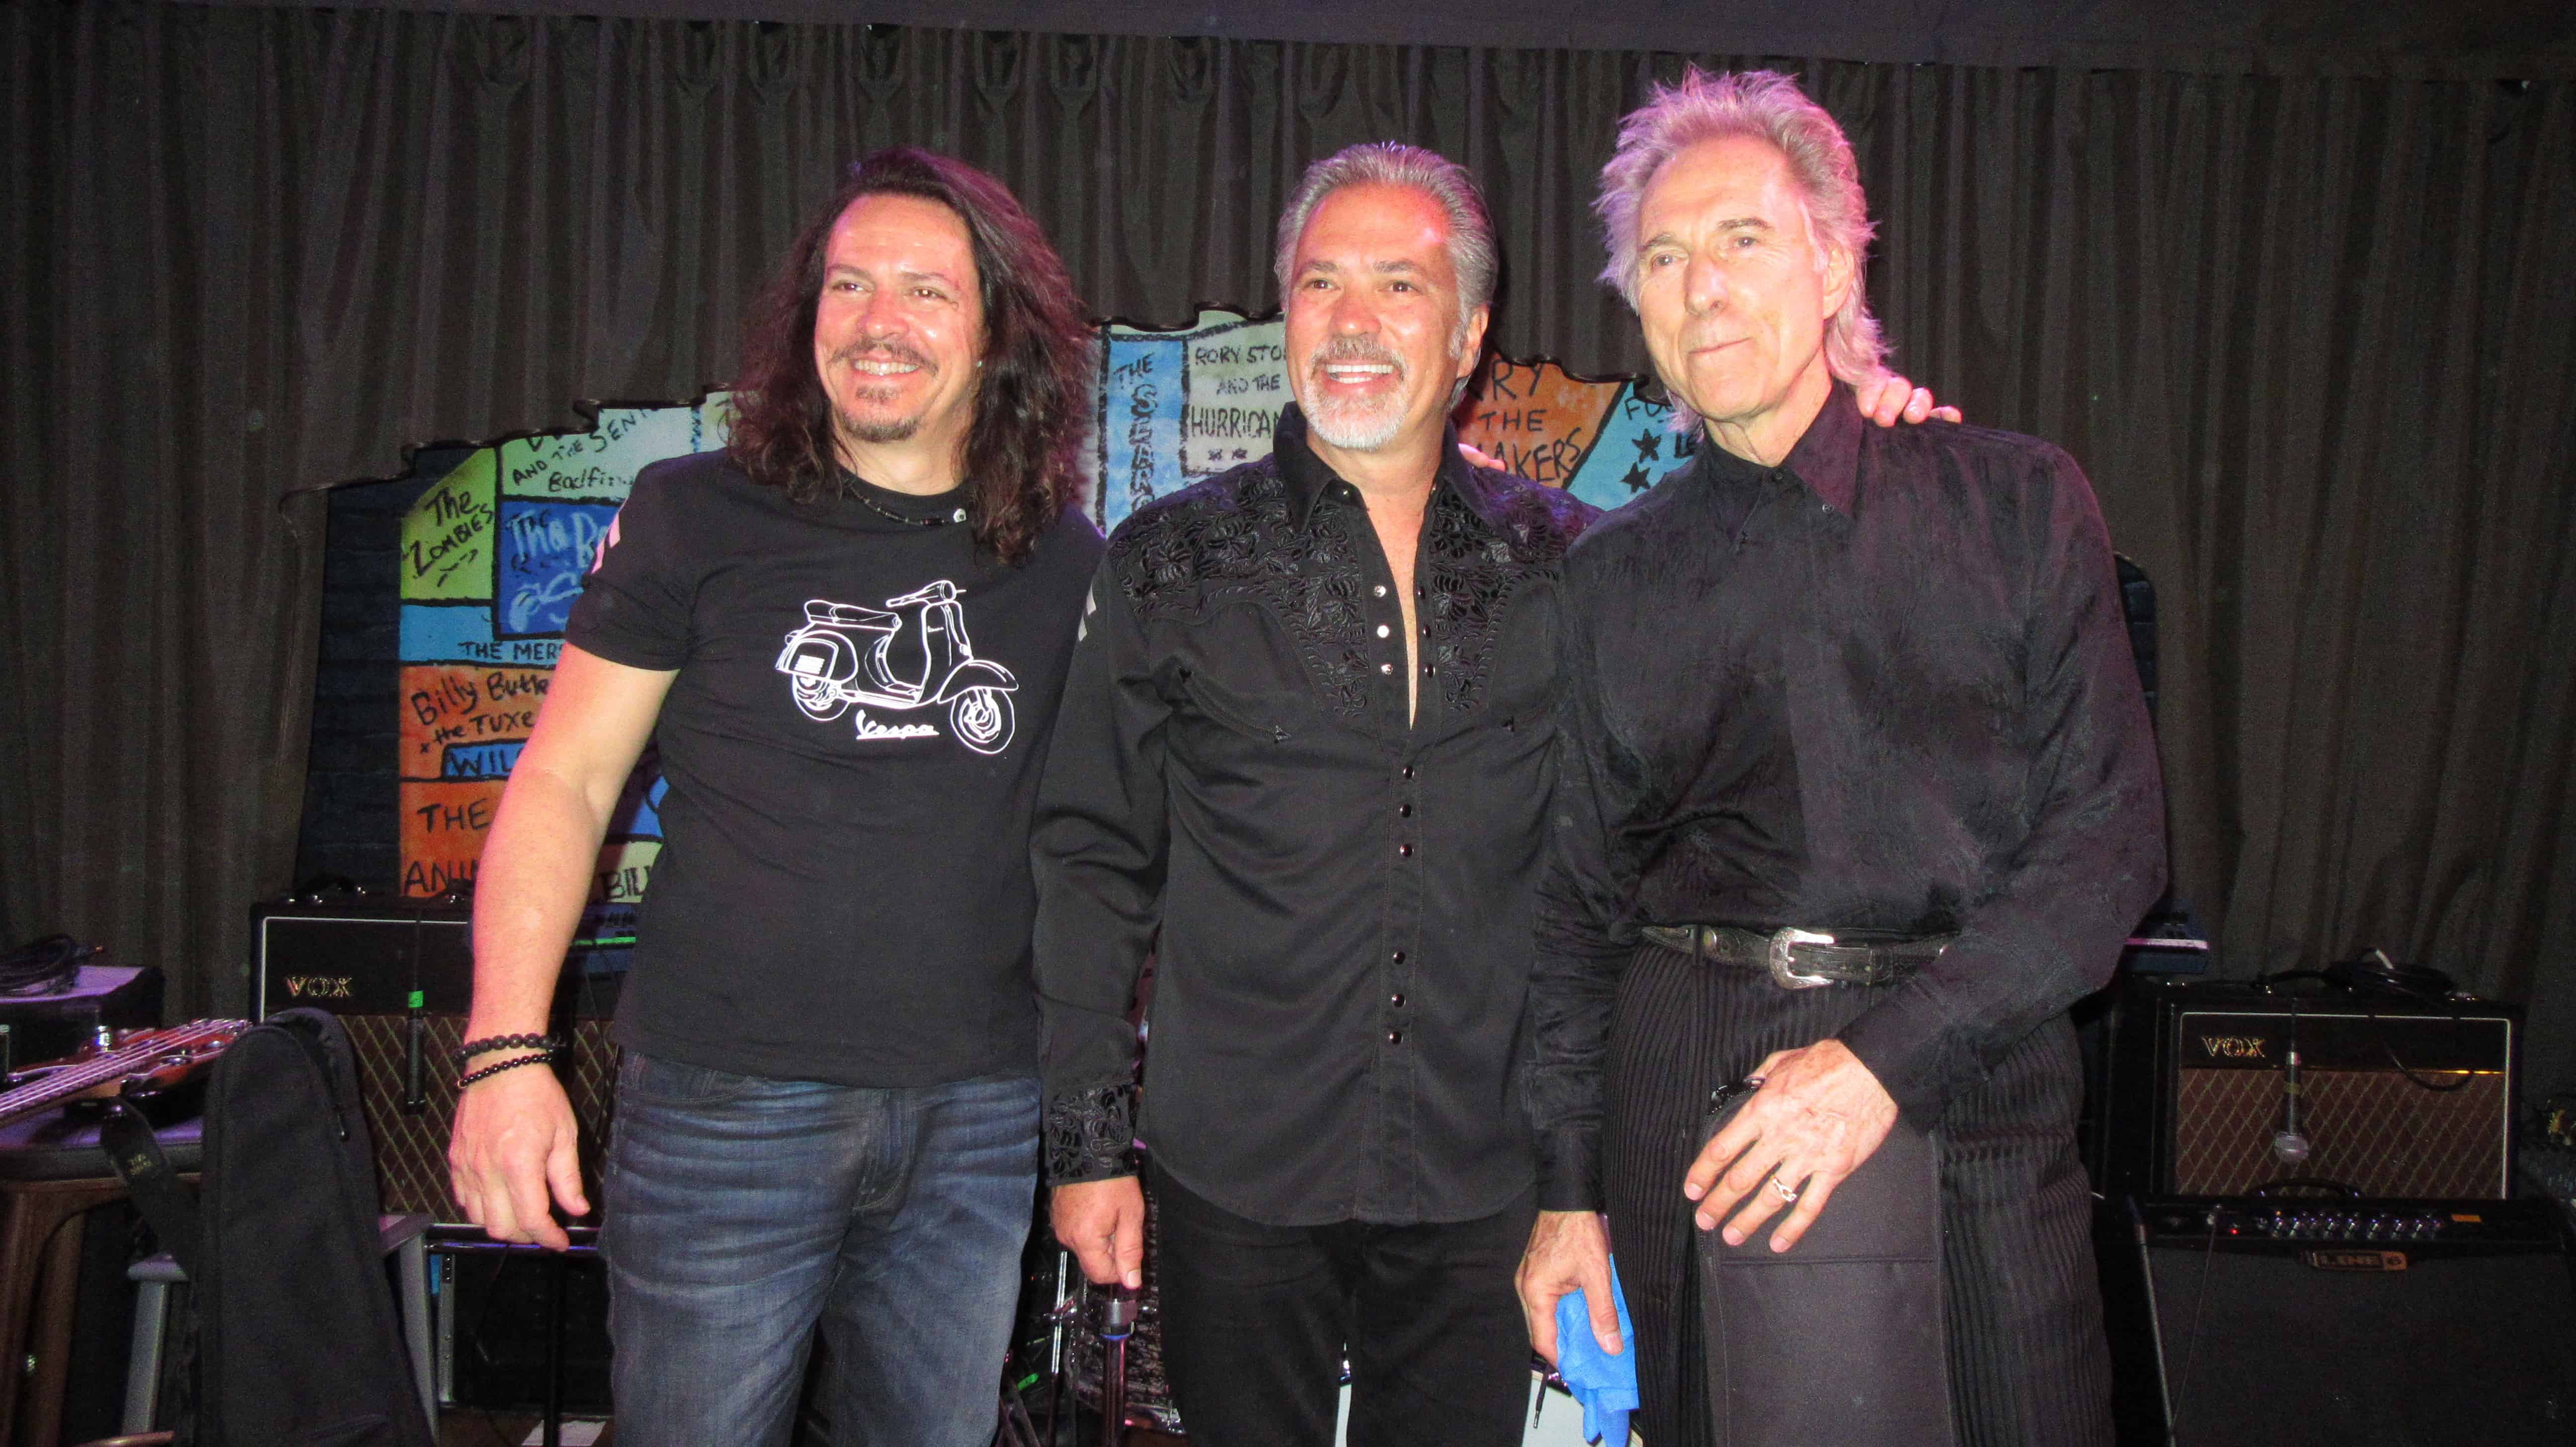 Gary Puckett and the Cruisin' Gap with Artists Scott Jacobs and Patrick Guyton